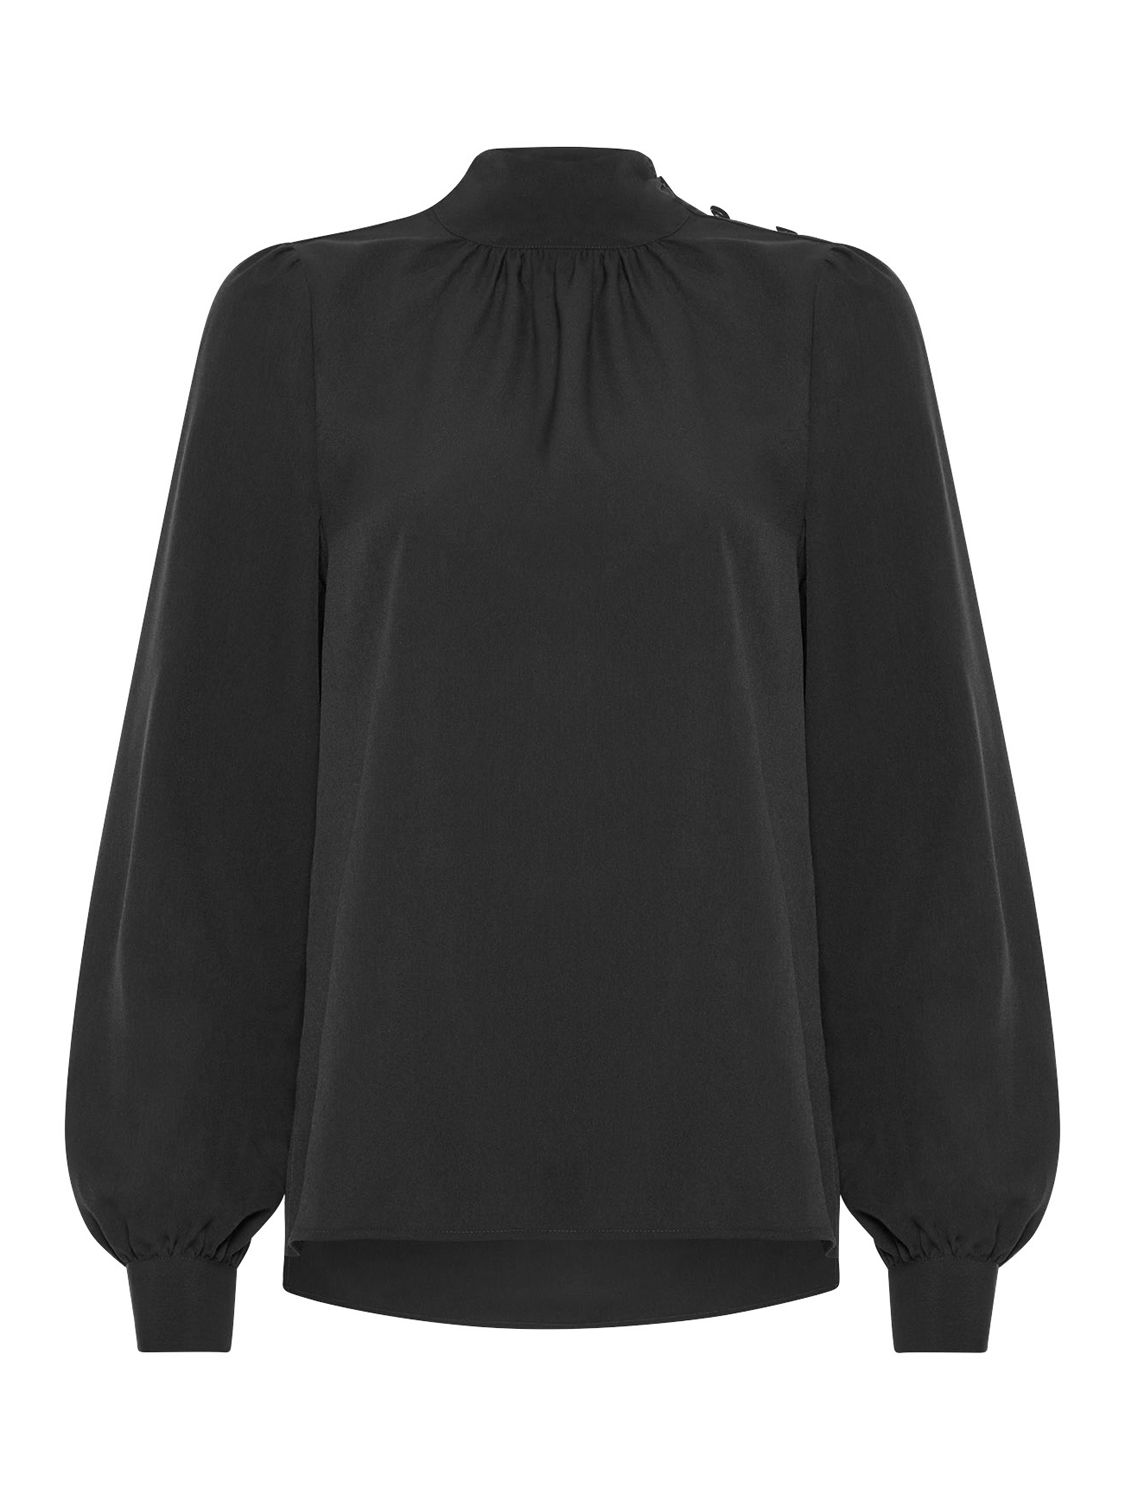 French Connection Arina Solid Button Neck Blouse, Black, XS